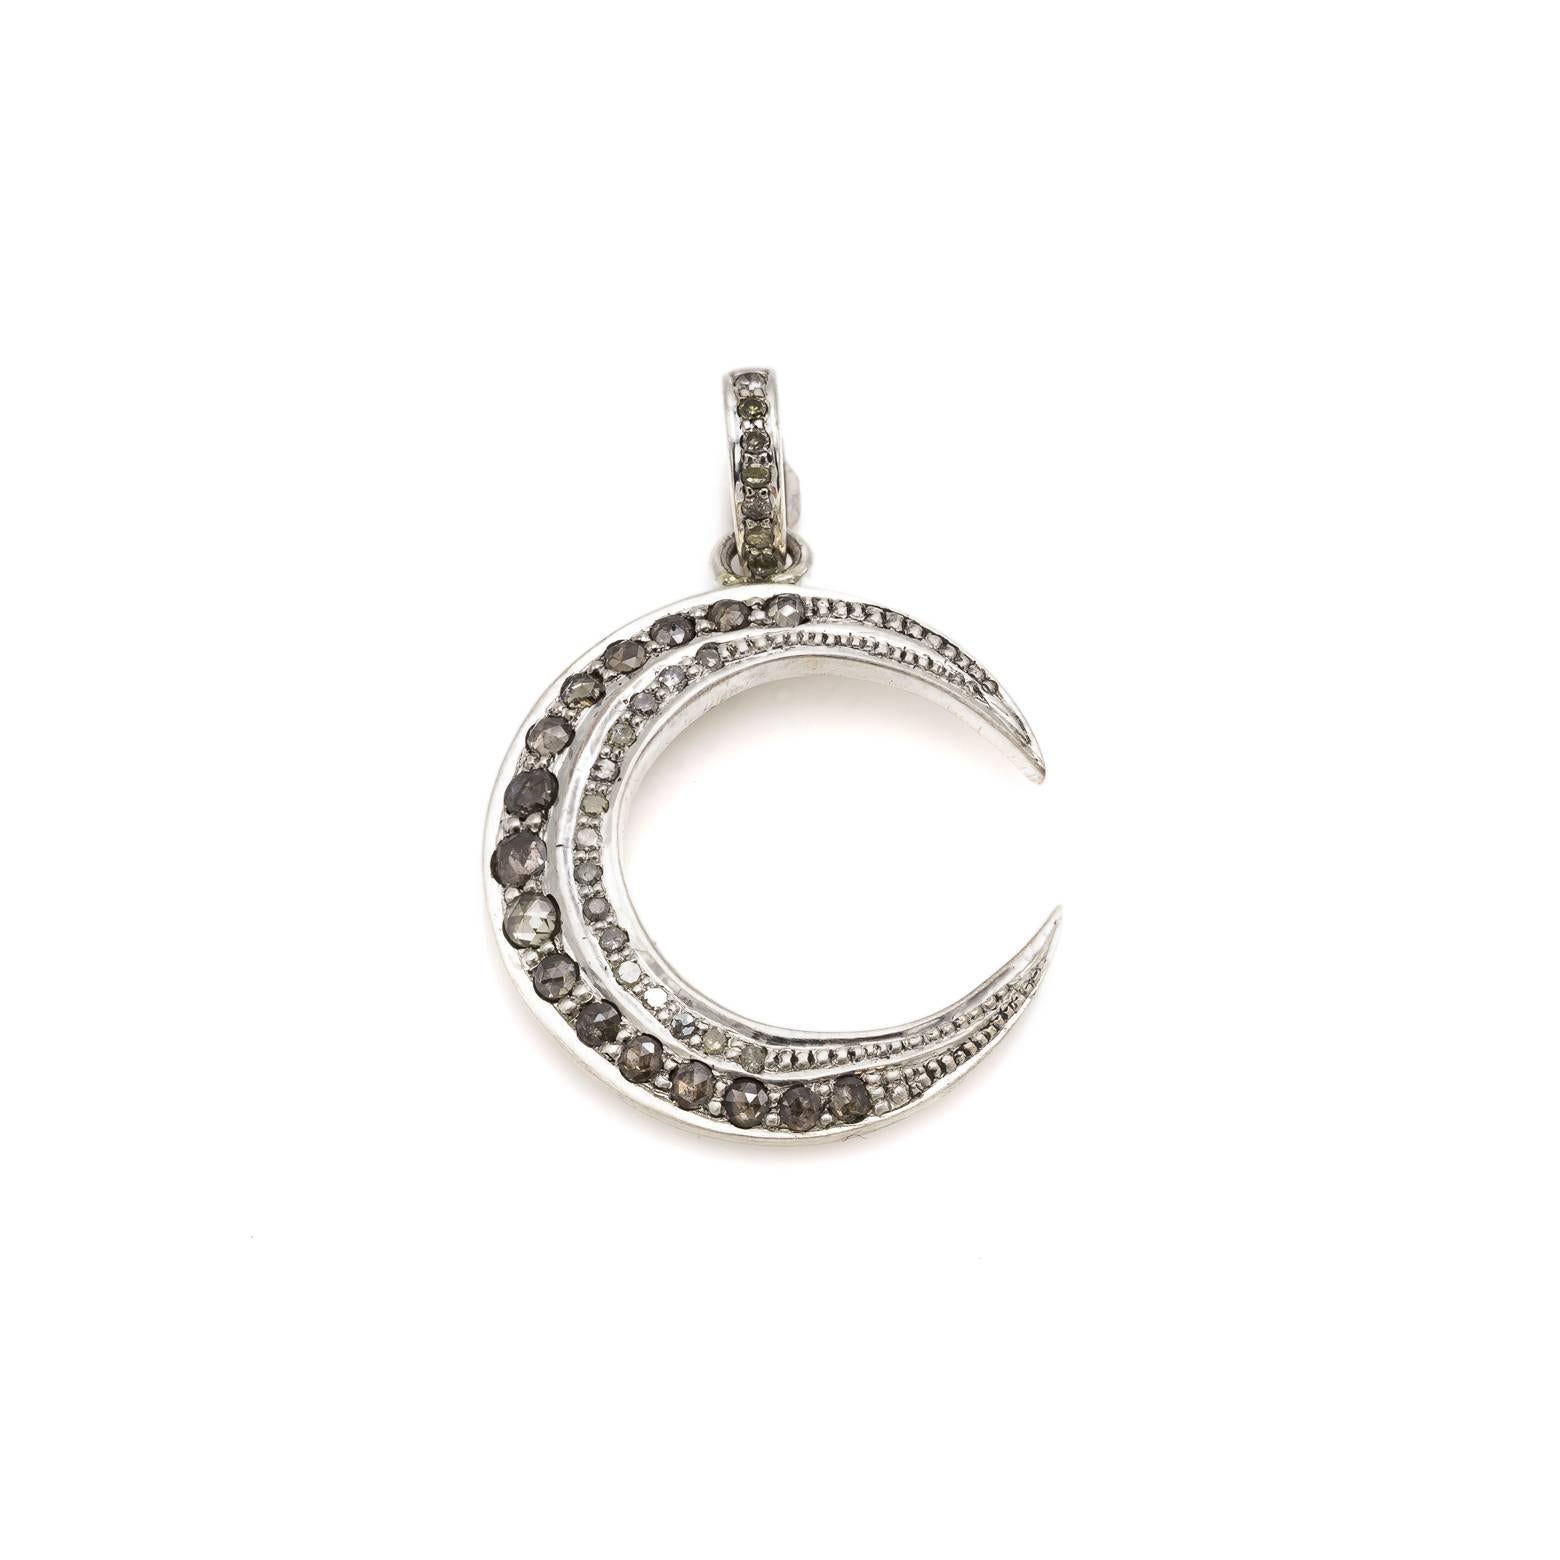 Modern White and Champagne Diamond Moon Pendant Set in Black Oxidized Sterling Silver